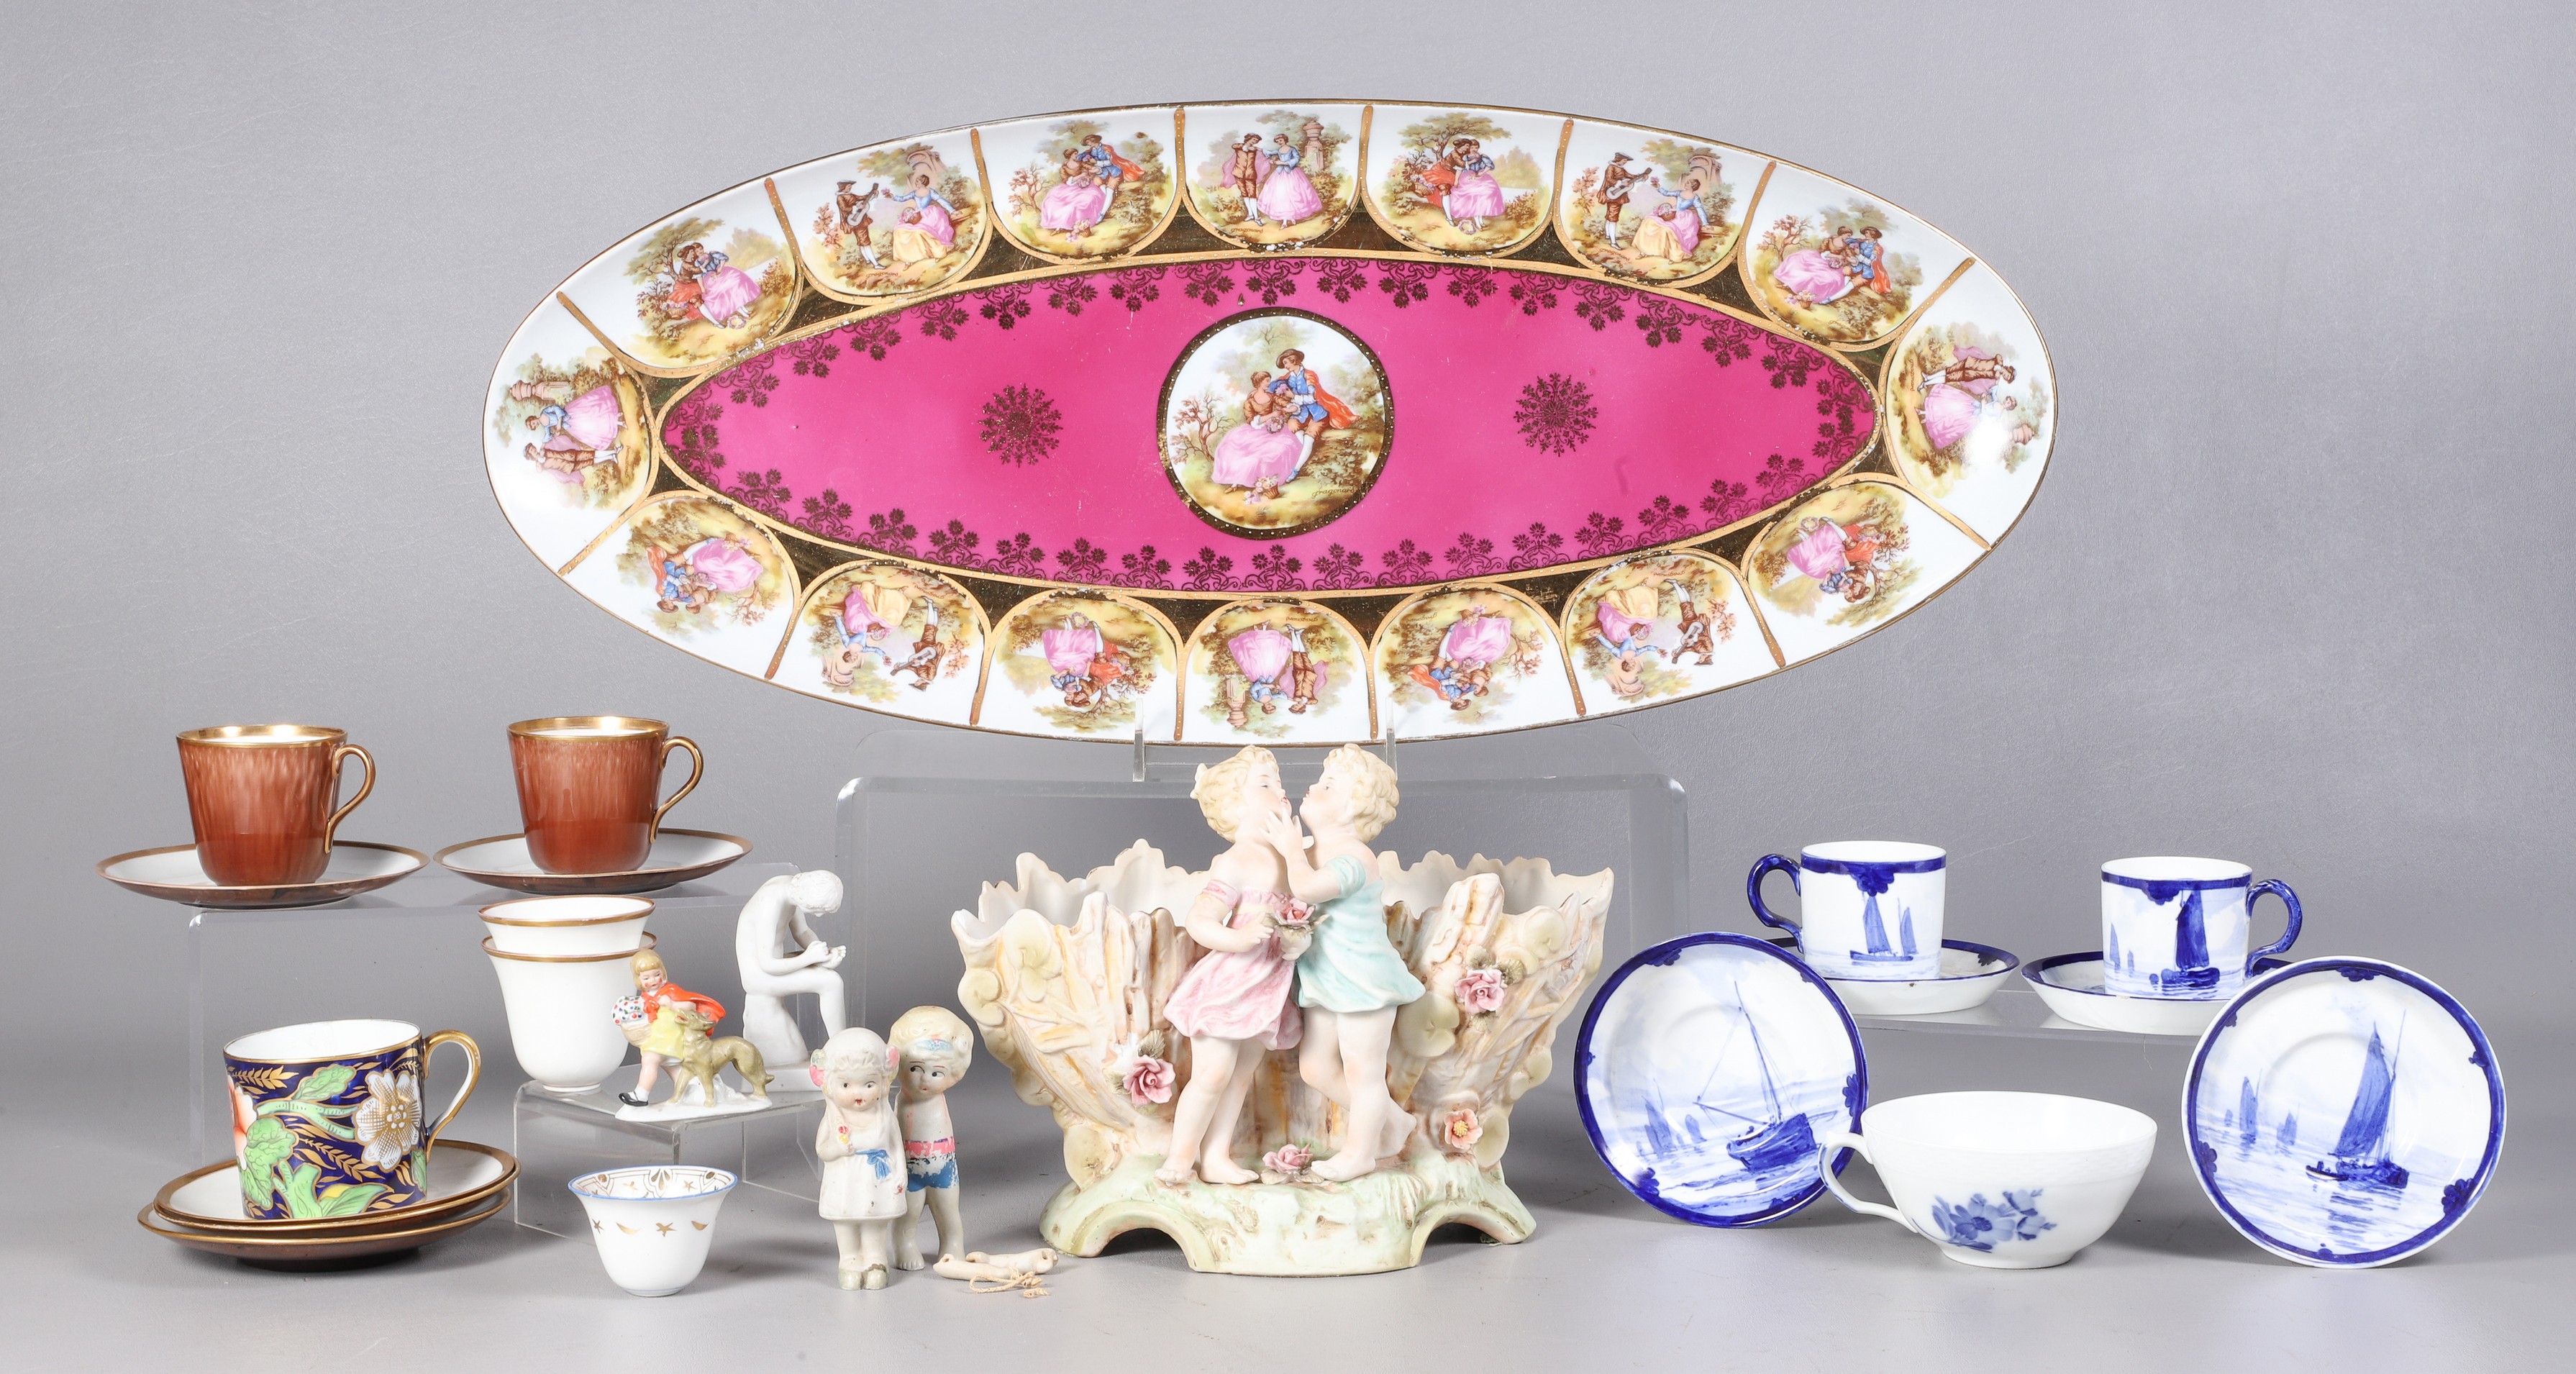 Porcelain figures and table items 2e0bc2